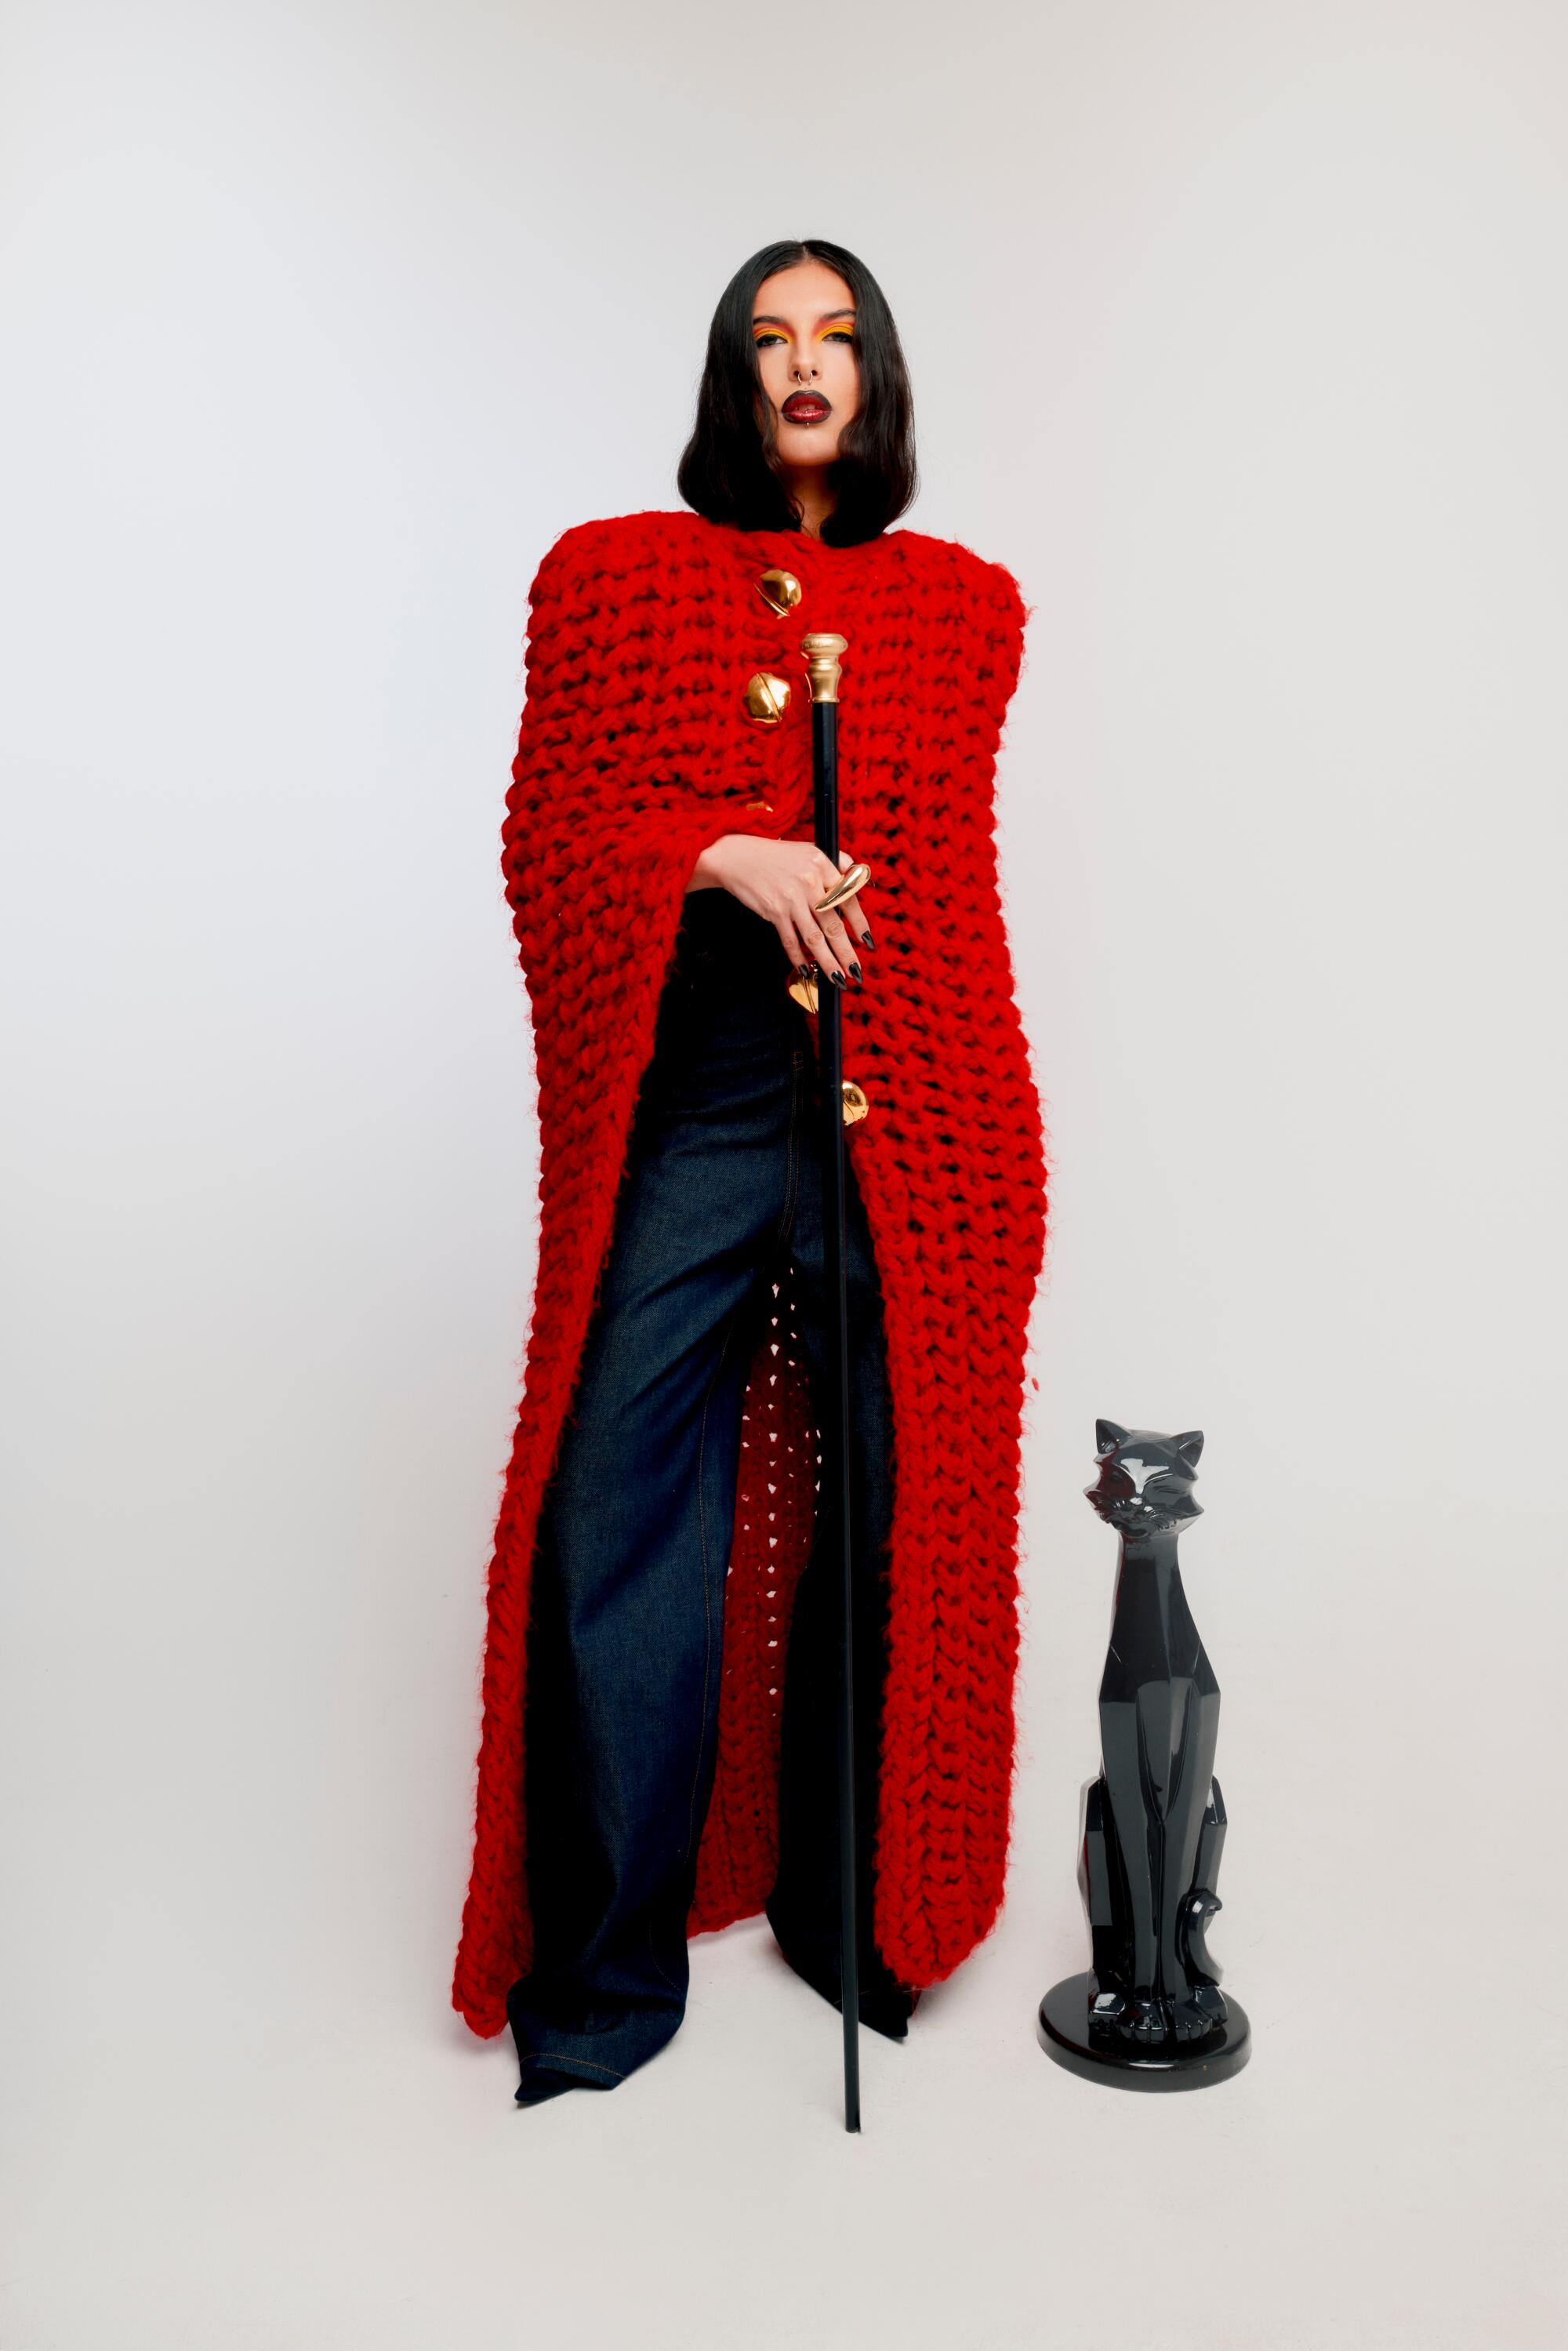 A woman wears a red knit sweater and stand beside a sculpture of a black cat.